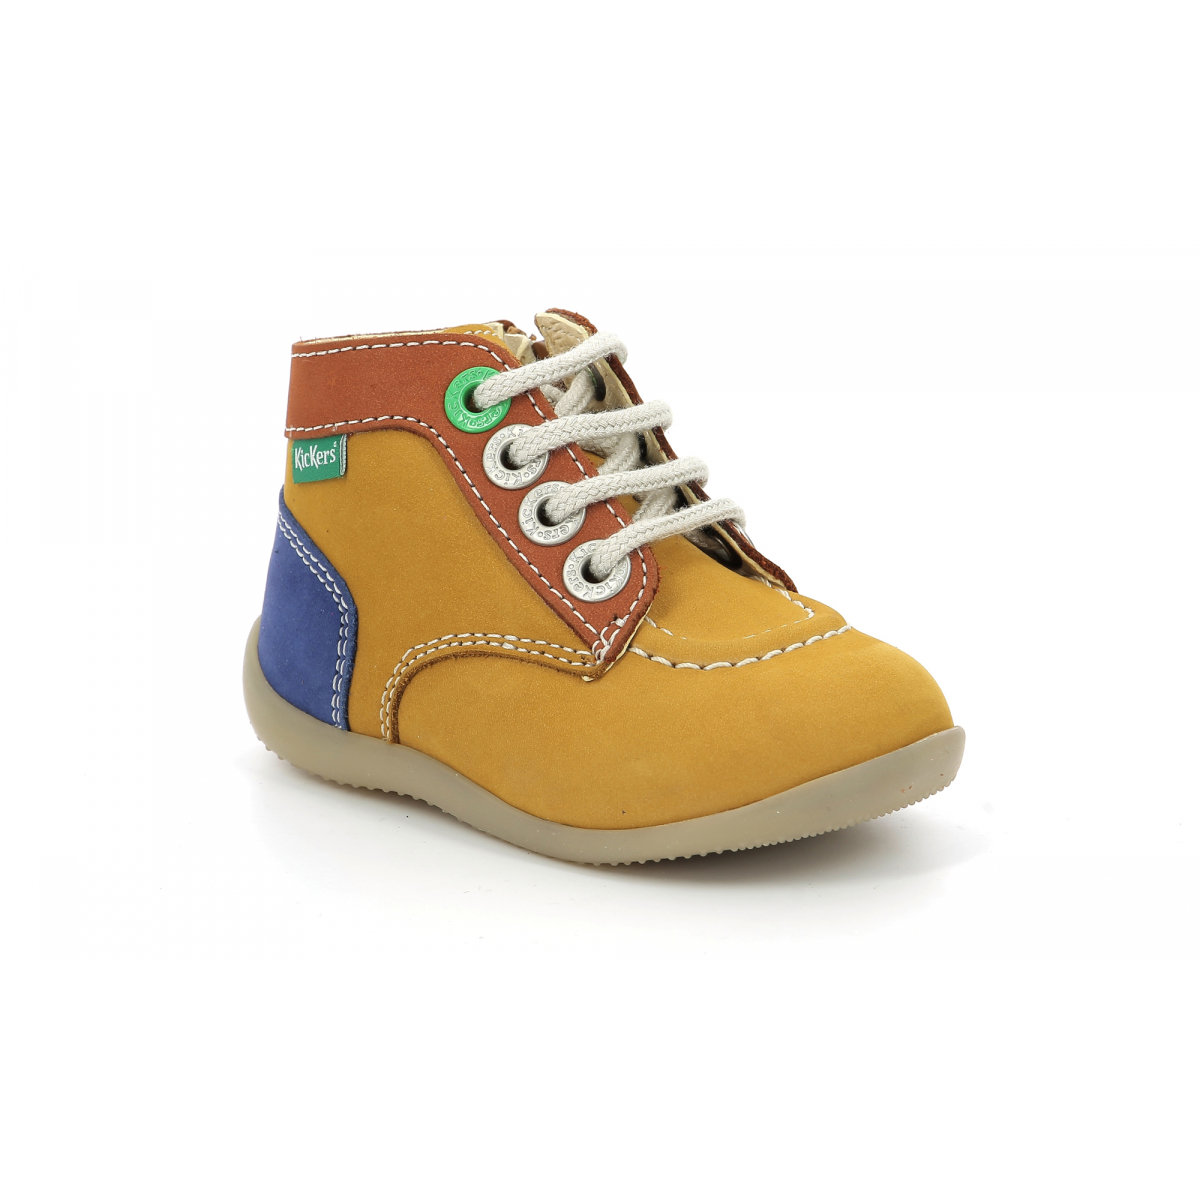 Bonzip yellow, and blue ankle boots for boy - Kickers © Official website